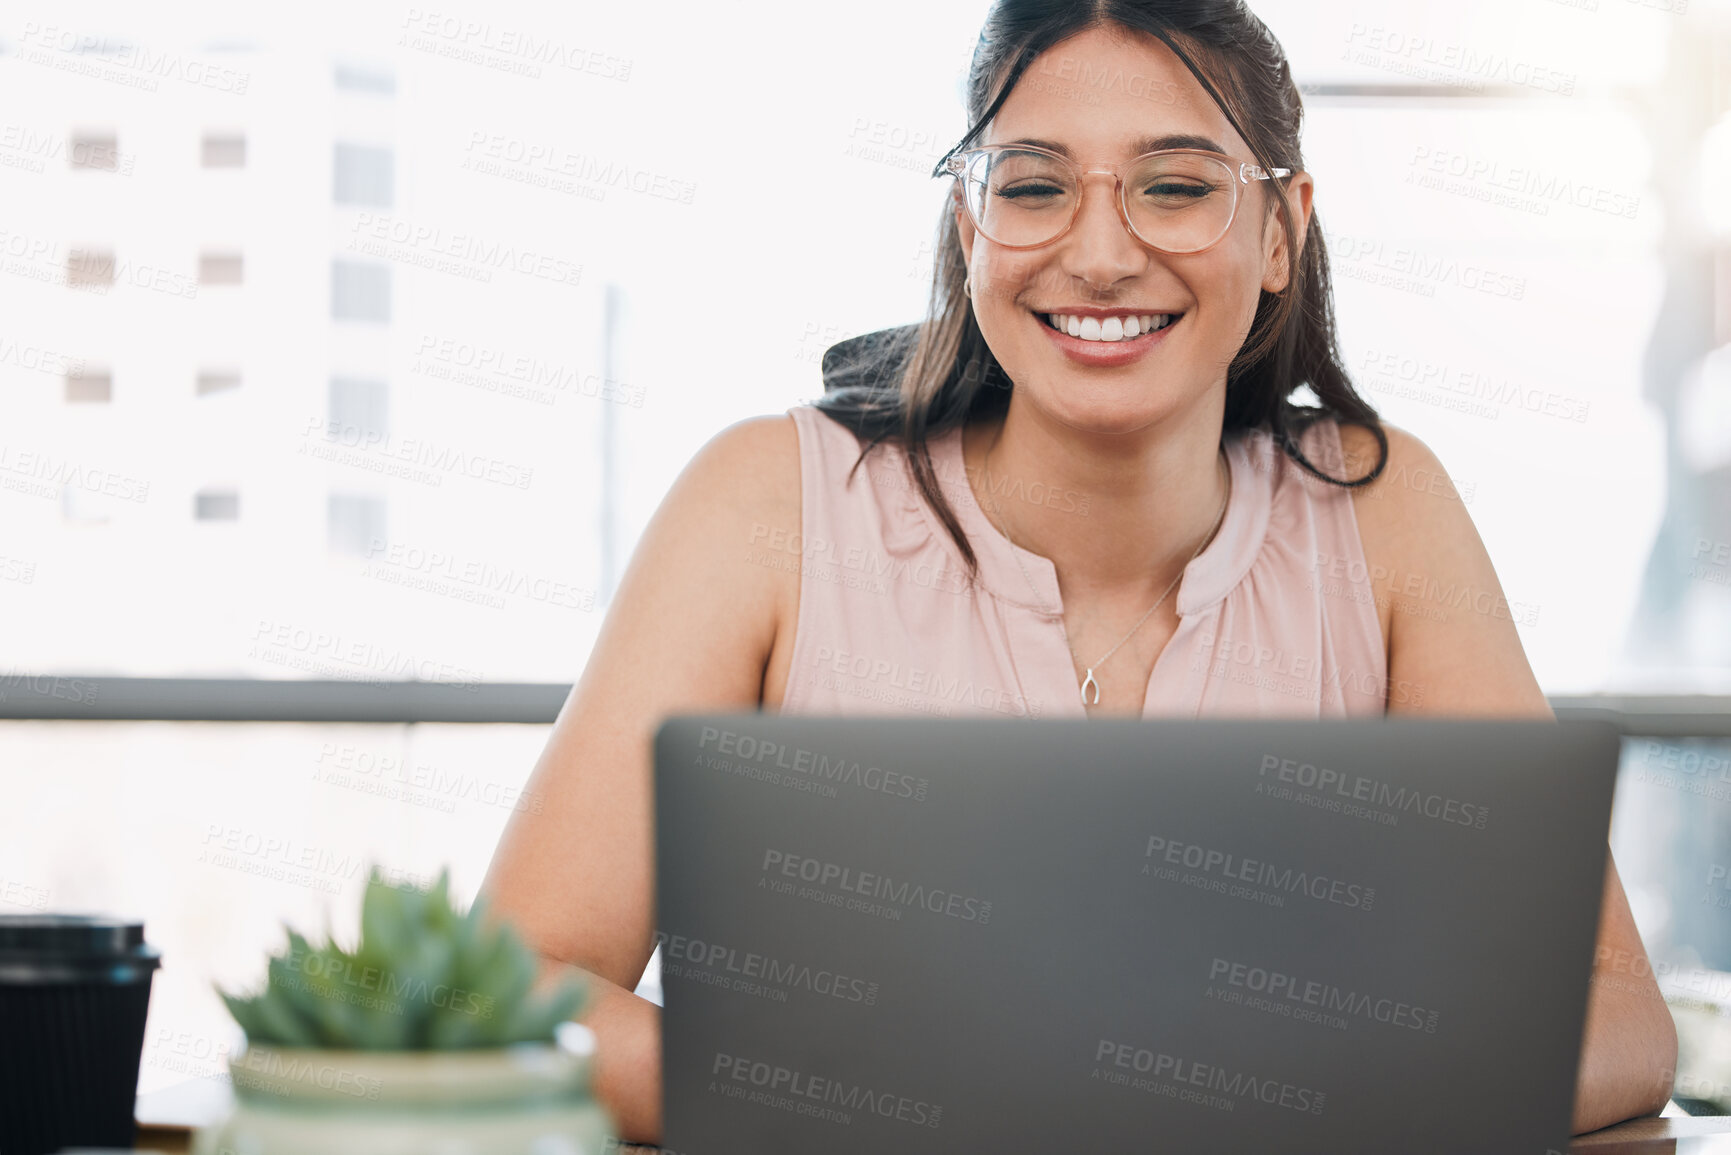 Buy stock photo Shot of an attractive young businesswoman sitting alone in the office and using her laptop